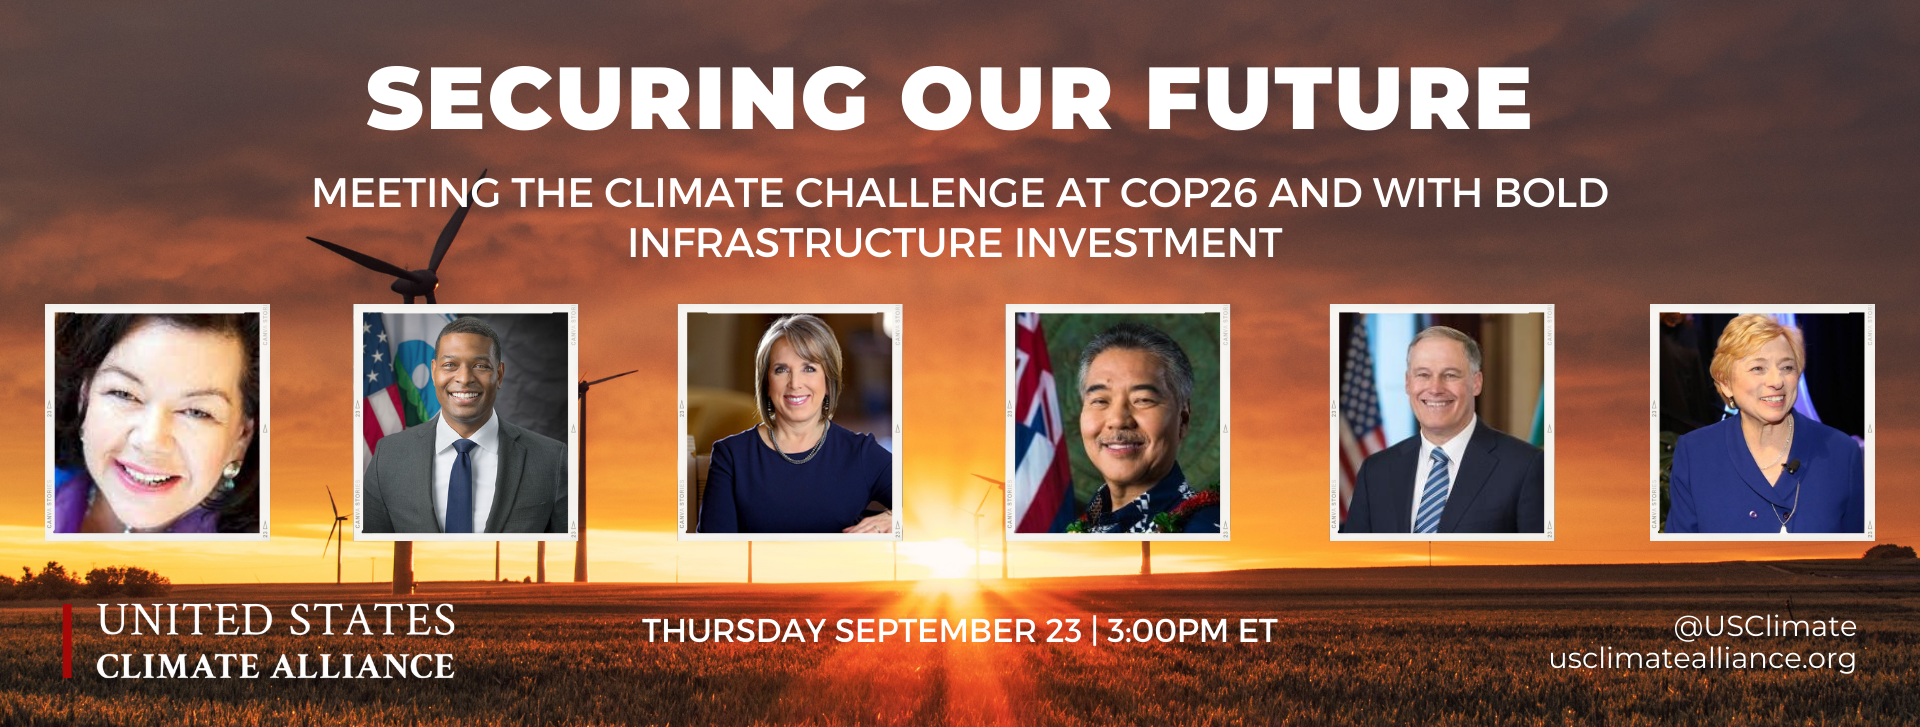 Climate Week NYC 2021 – Securing Our Future: Meeting the Climate Challenge at COP26 and with Bold Infrastructure Investment | U.S. Climate Alliance